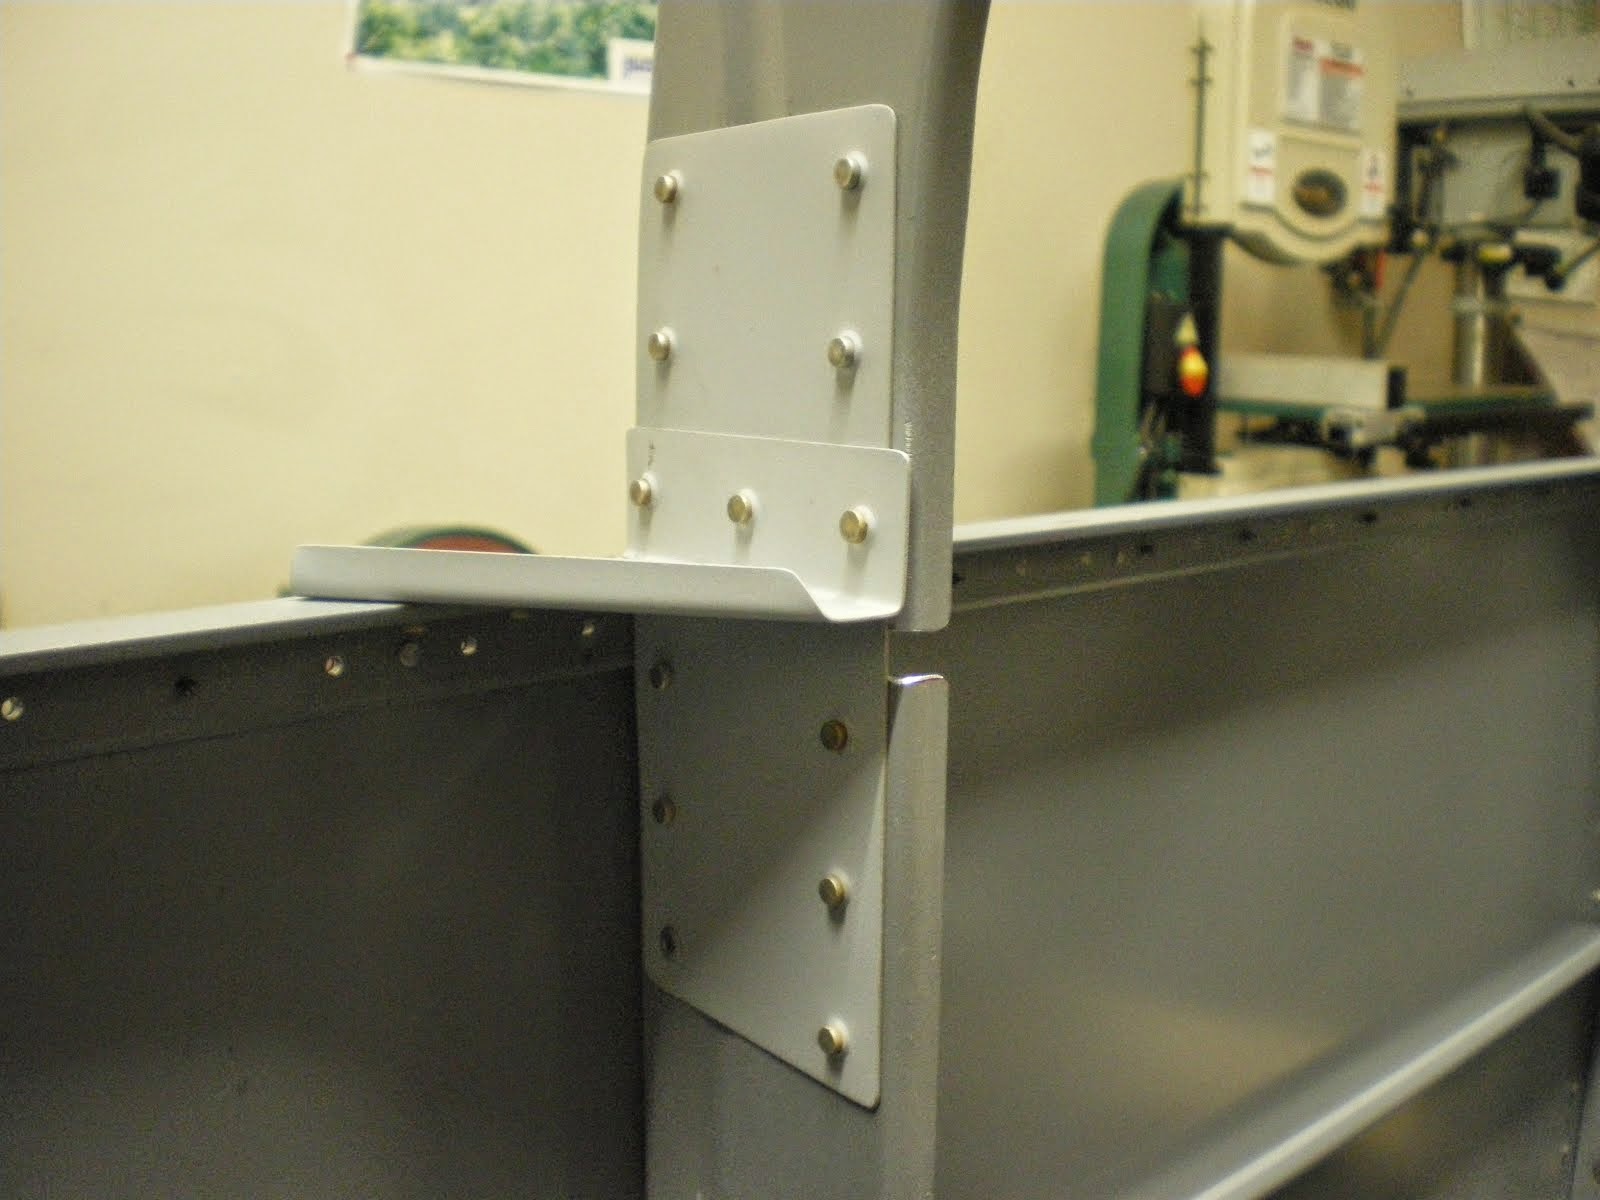 Splice plate and stiffener bracket riveted in place